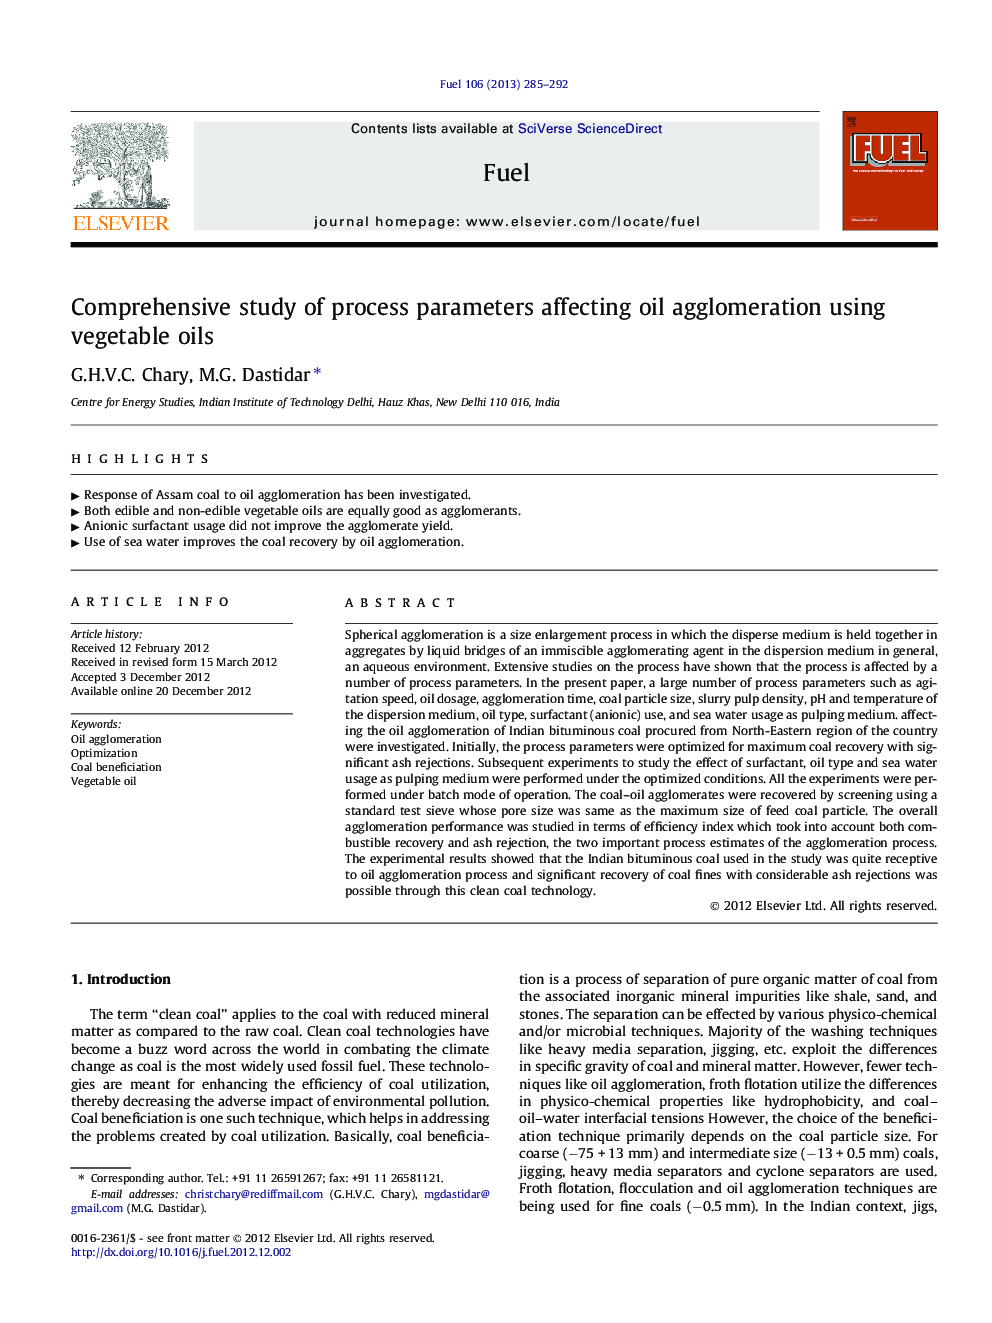 Comprehensive study of process parameters affecting oil agglomeration using vegetable oils